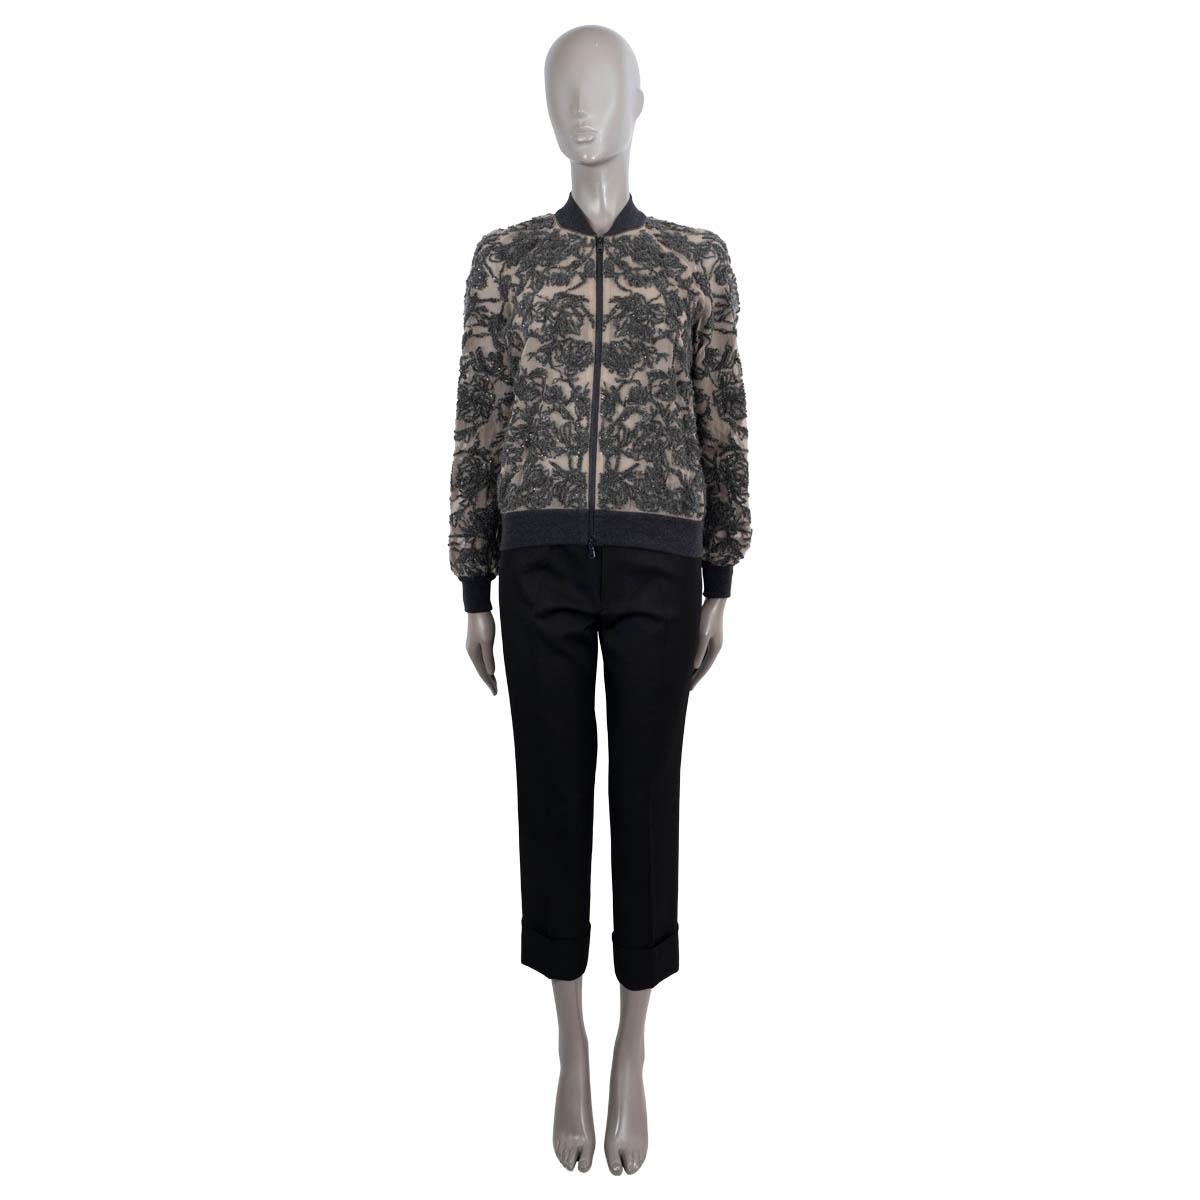 100% authentic Brunello Cucinelli sequin embroidered floral bomber in anthracite and taupe mohair (61%), polyamide (31%) and elastane (6%). Features a rib-knit neck, cuffs and hem. Closes with a zipper. Unlined. Brand new with